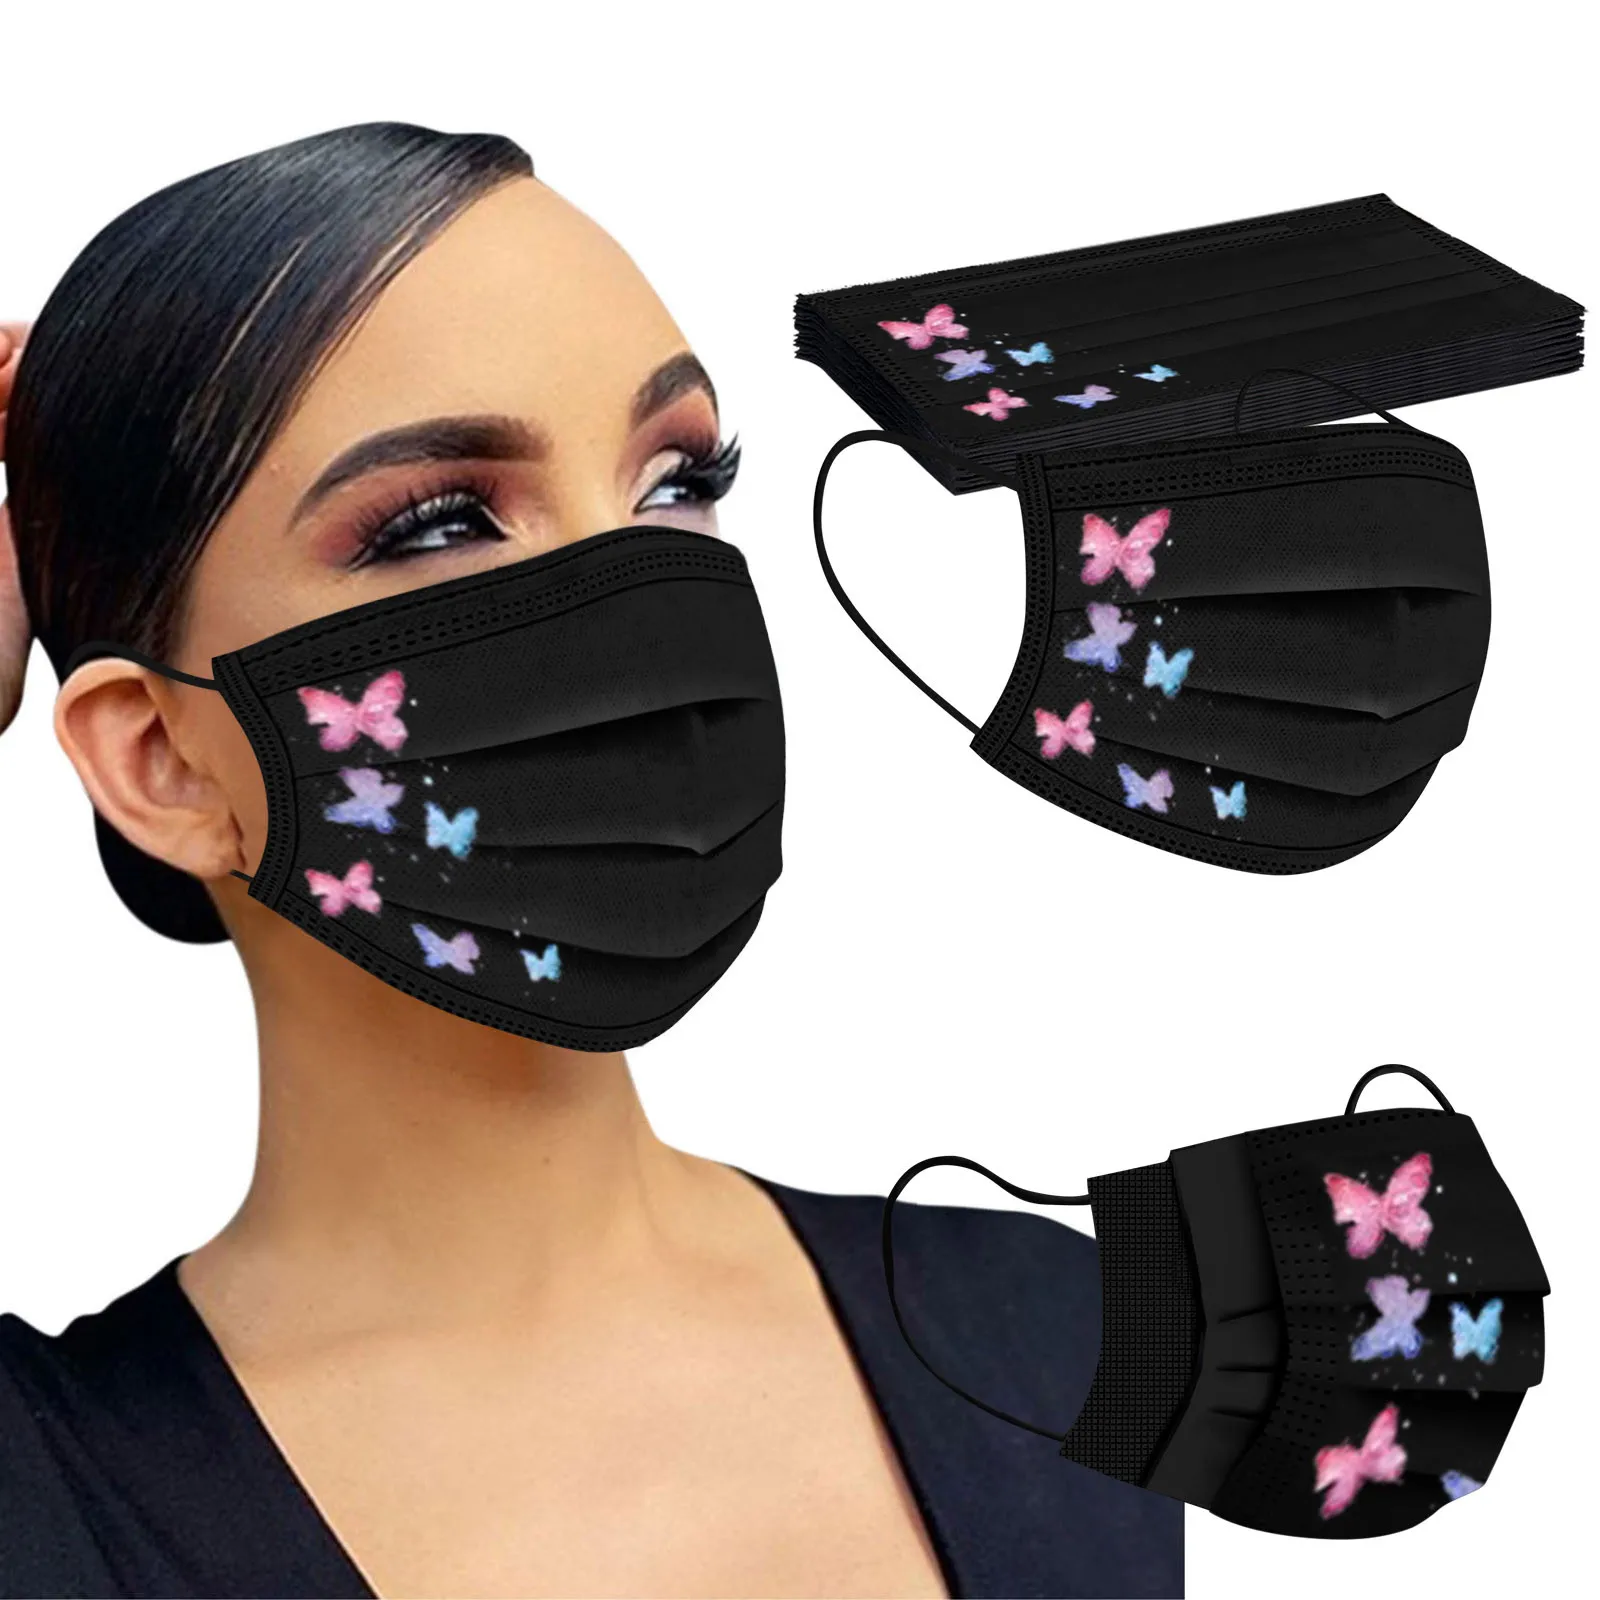 

10pc Adults Butterfly Print Halloween Cosplay Mask For Face Disposable Mondmasker Mascherine Masque Mascarillas Desechables